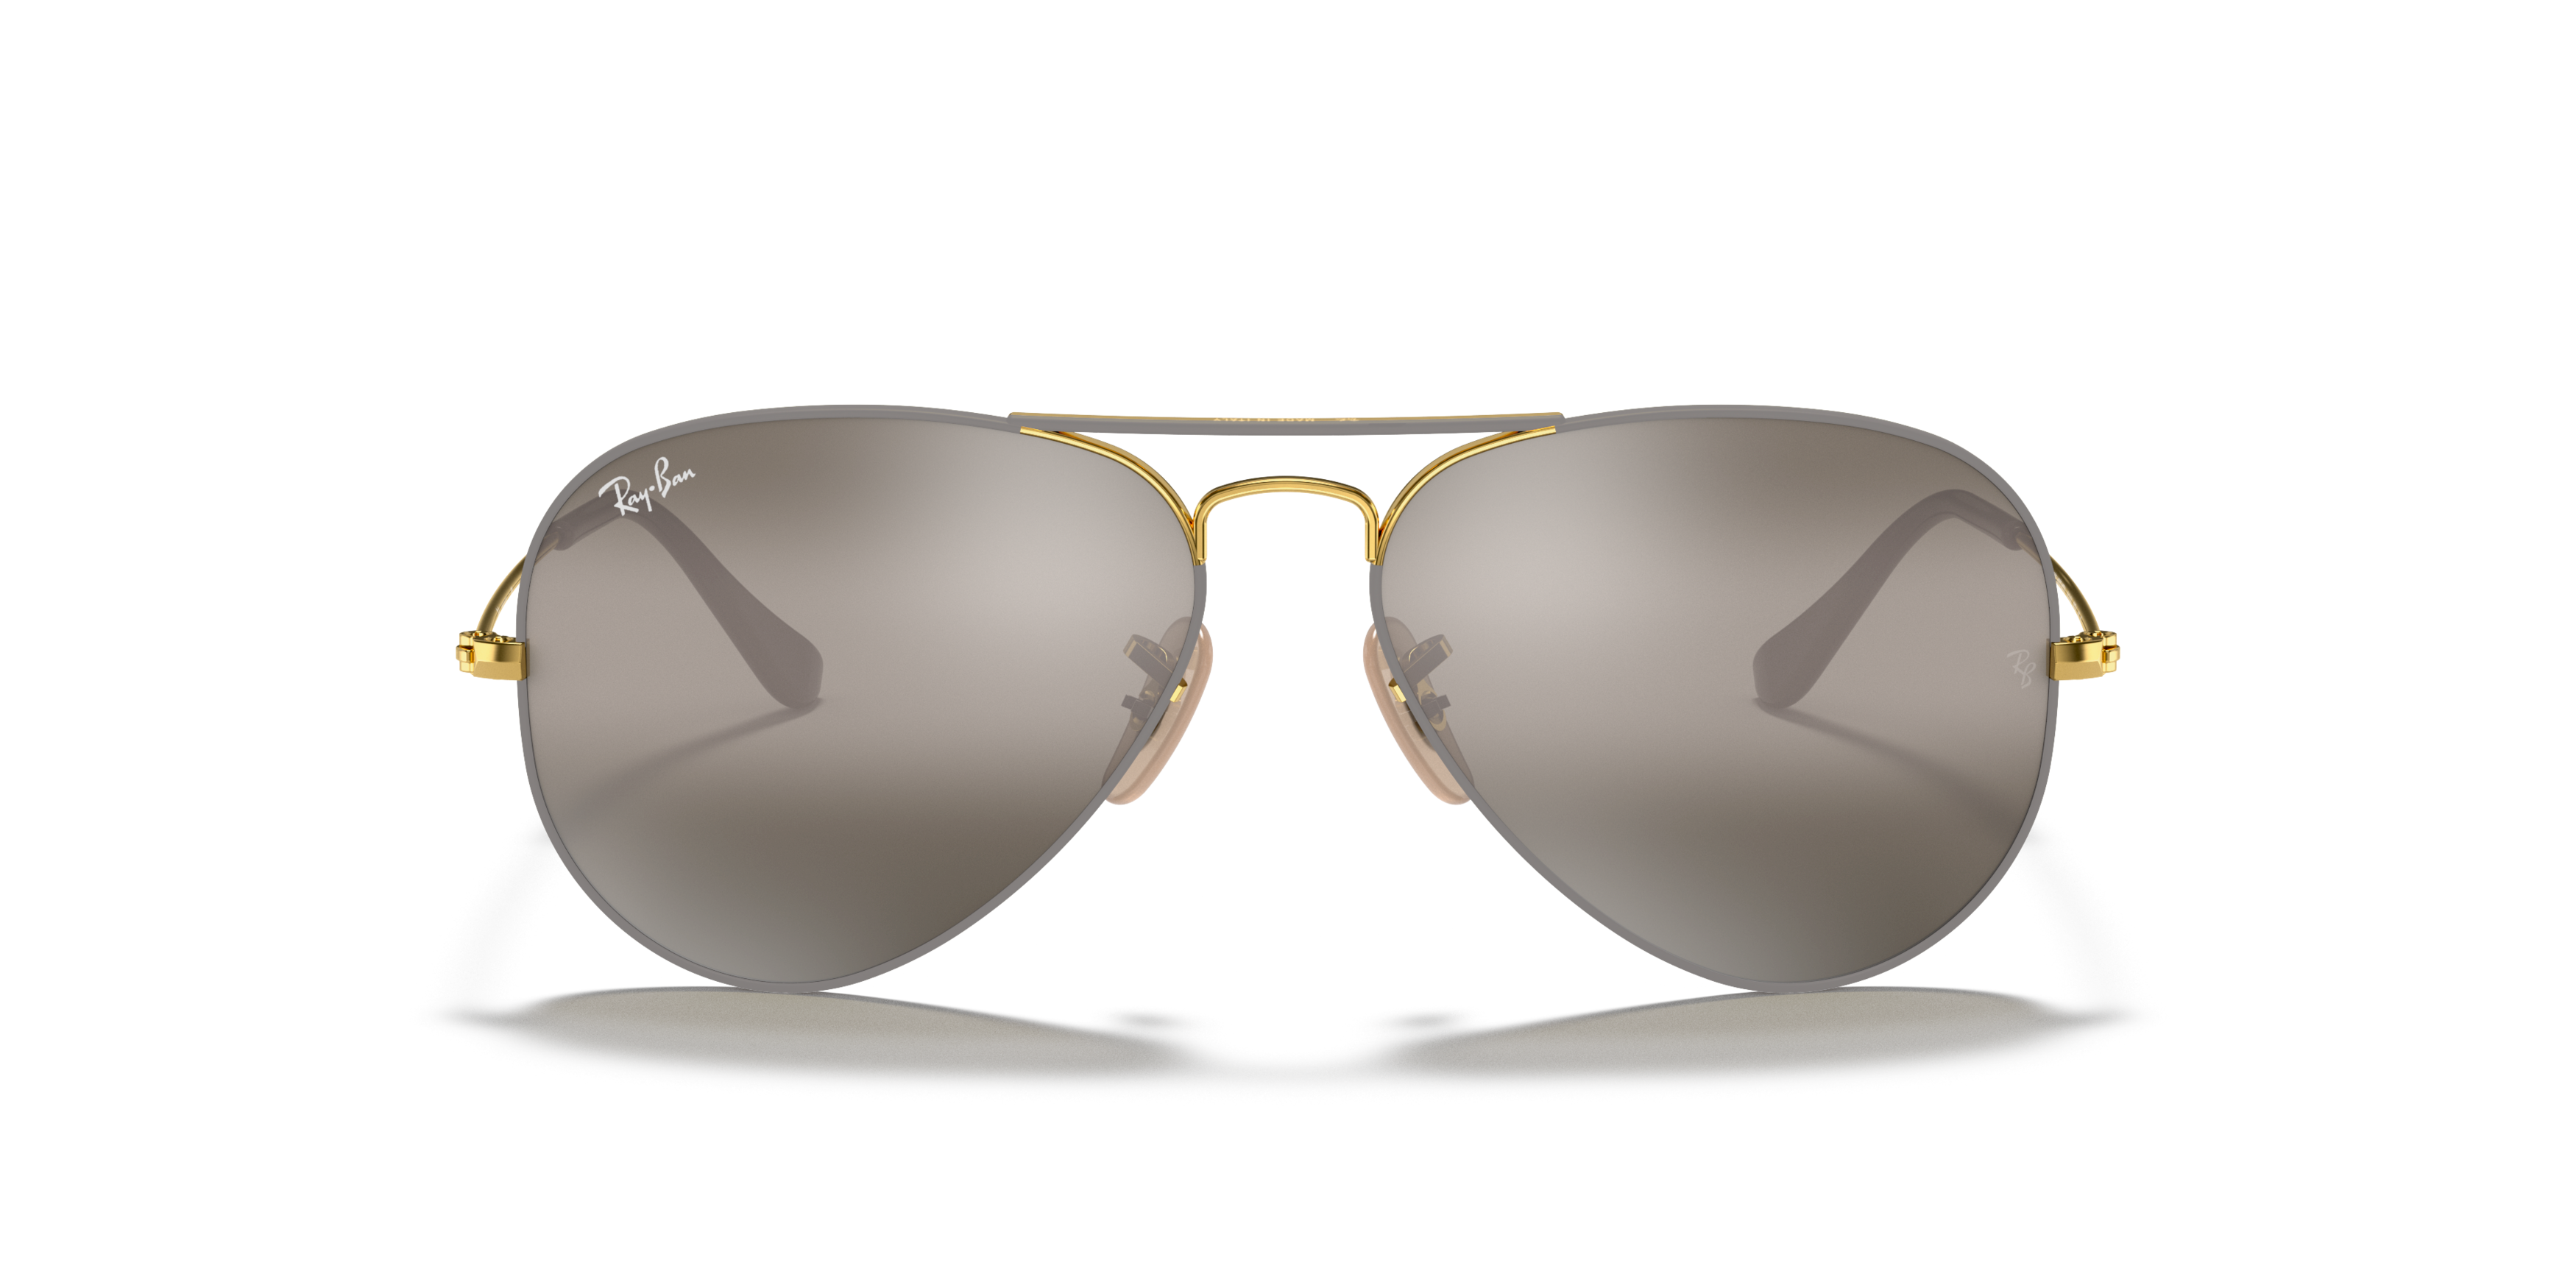 [products.image.front] Ray-Ban Aviator Mirror RB3025 9154AH